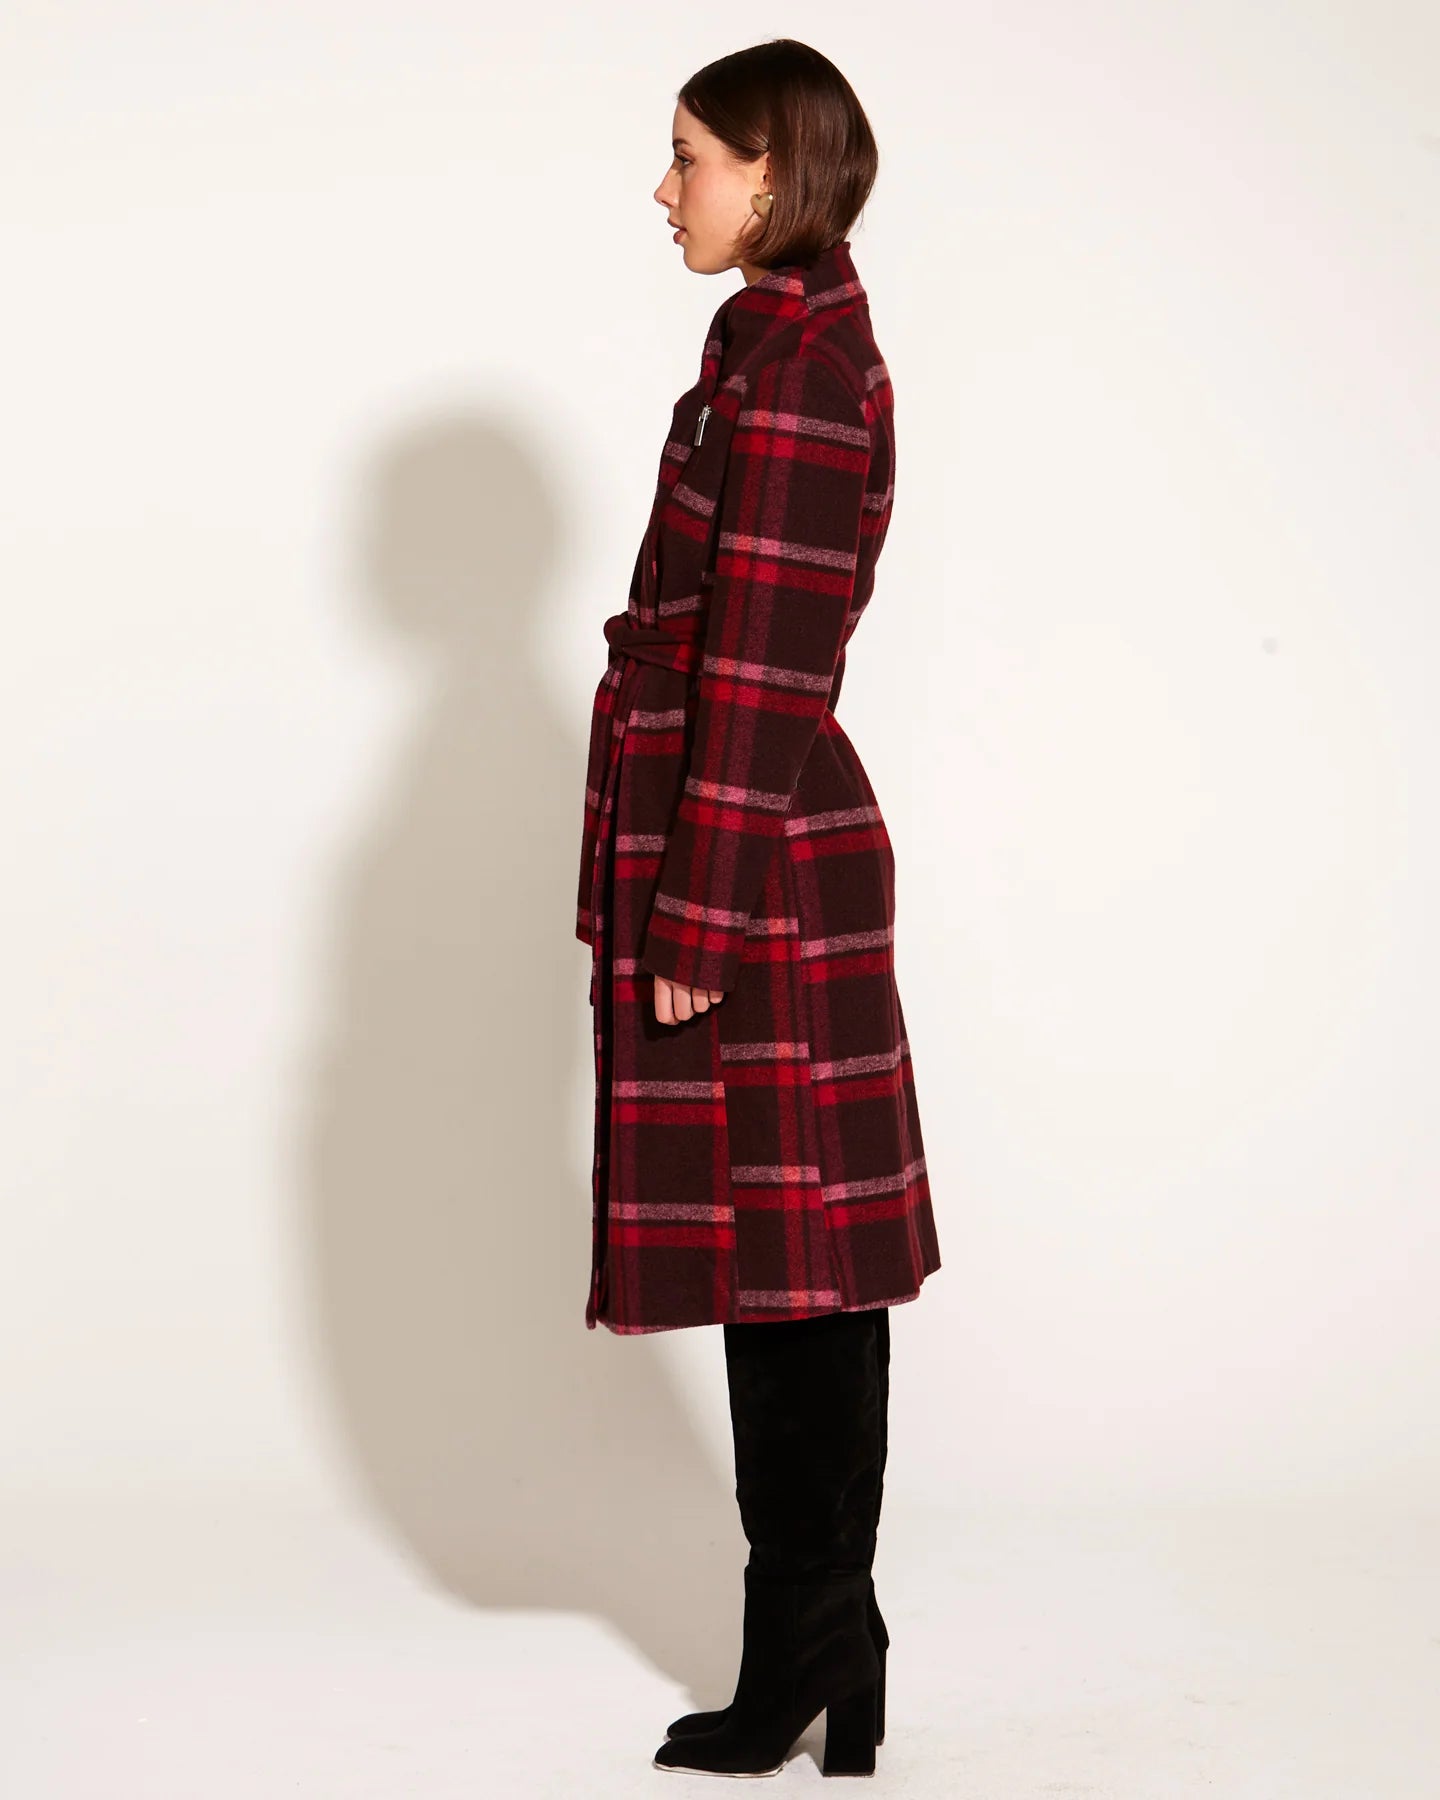 FATE+BECKER CHOOSE YOU COAT PINK RED CHECK